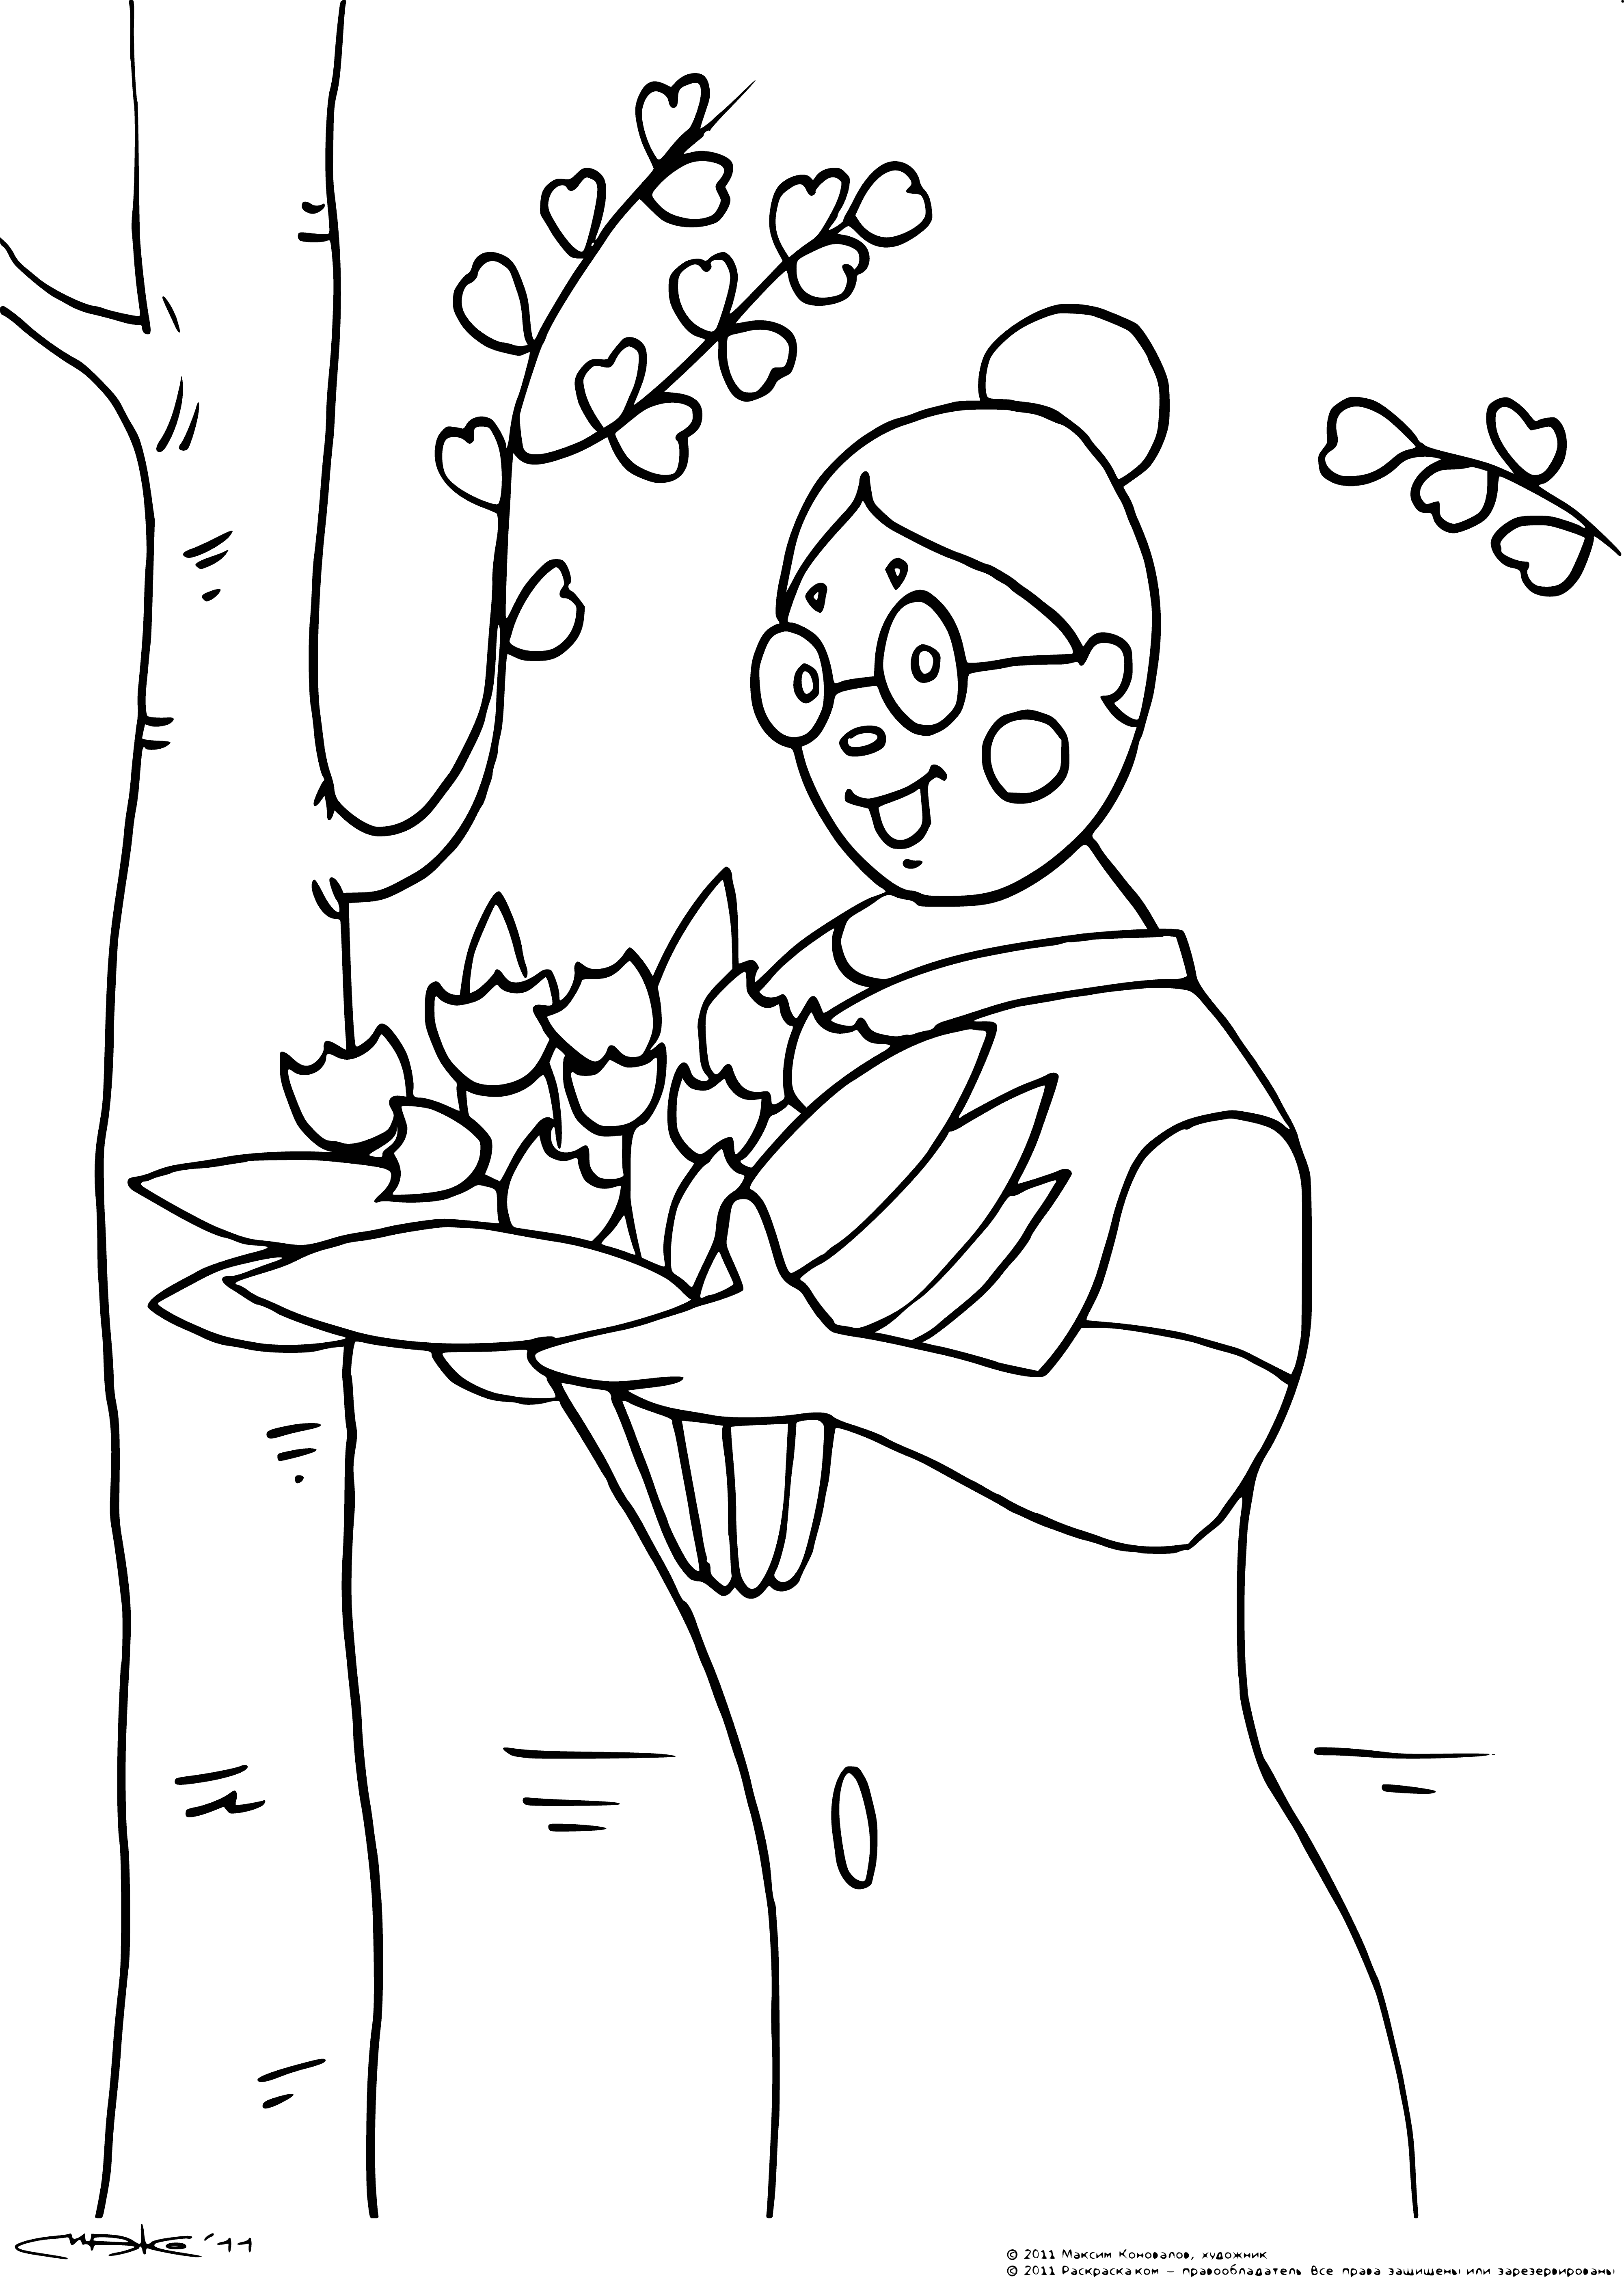 coloring page: A big green locomotive in the middle of a forest with a lake in the bottom left corner. #coloringtime